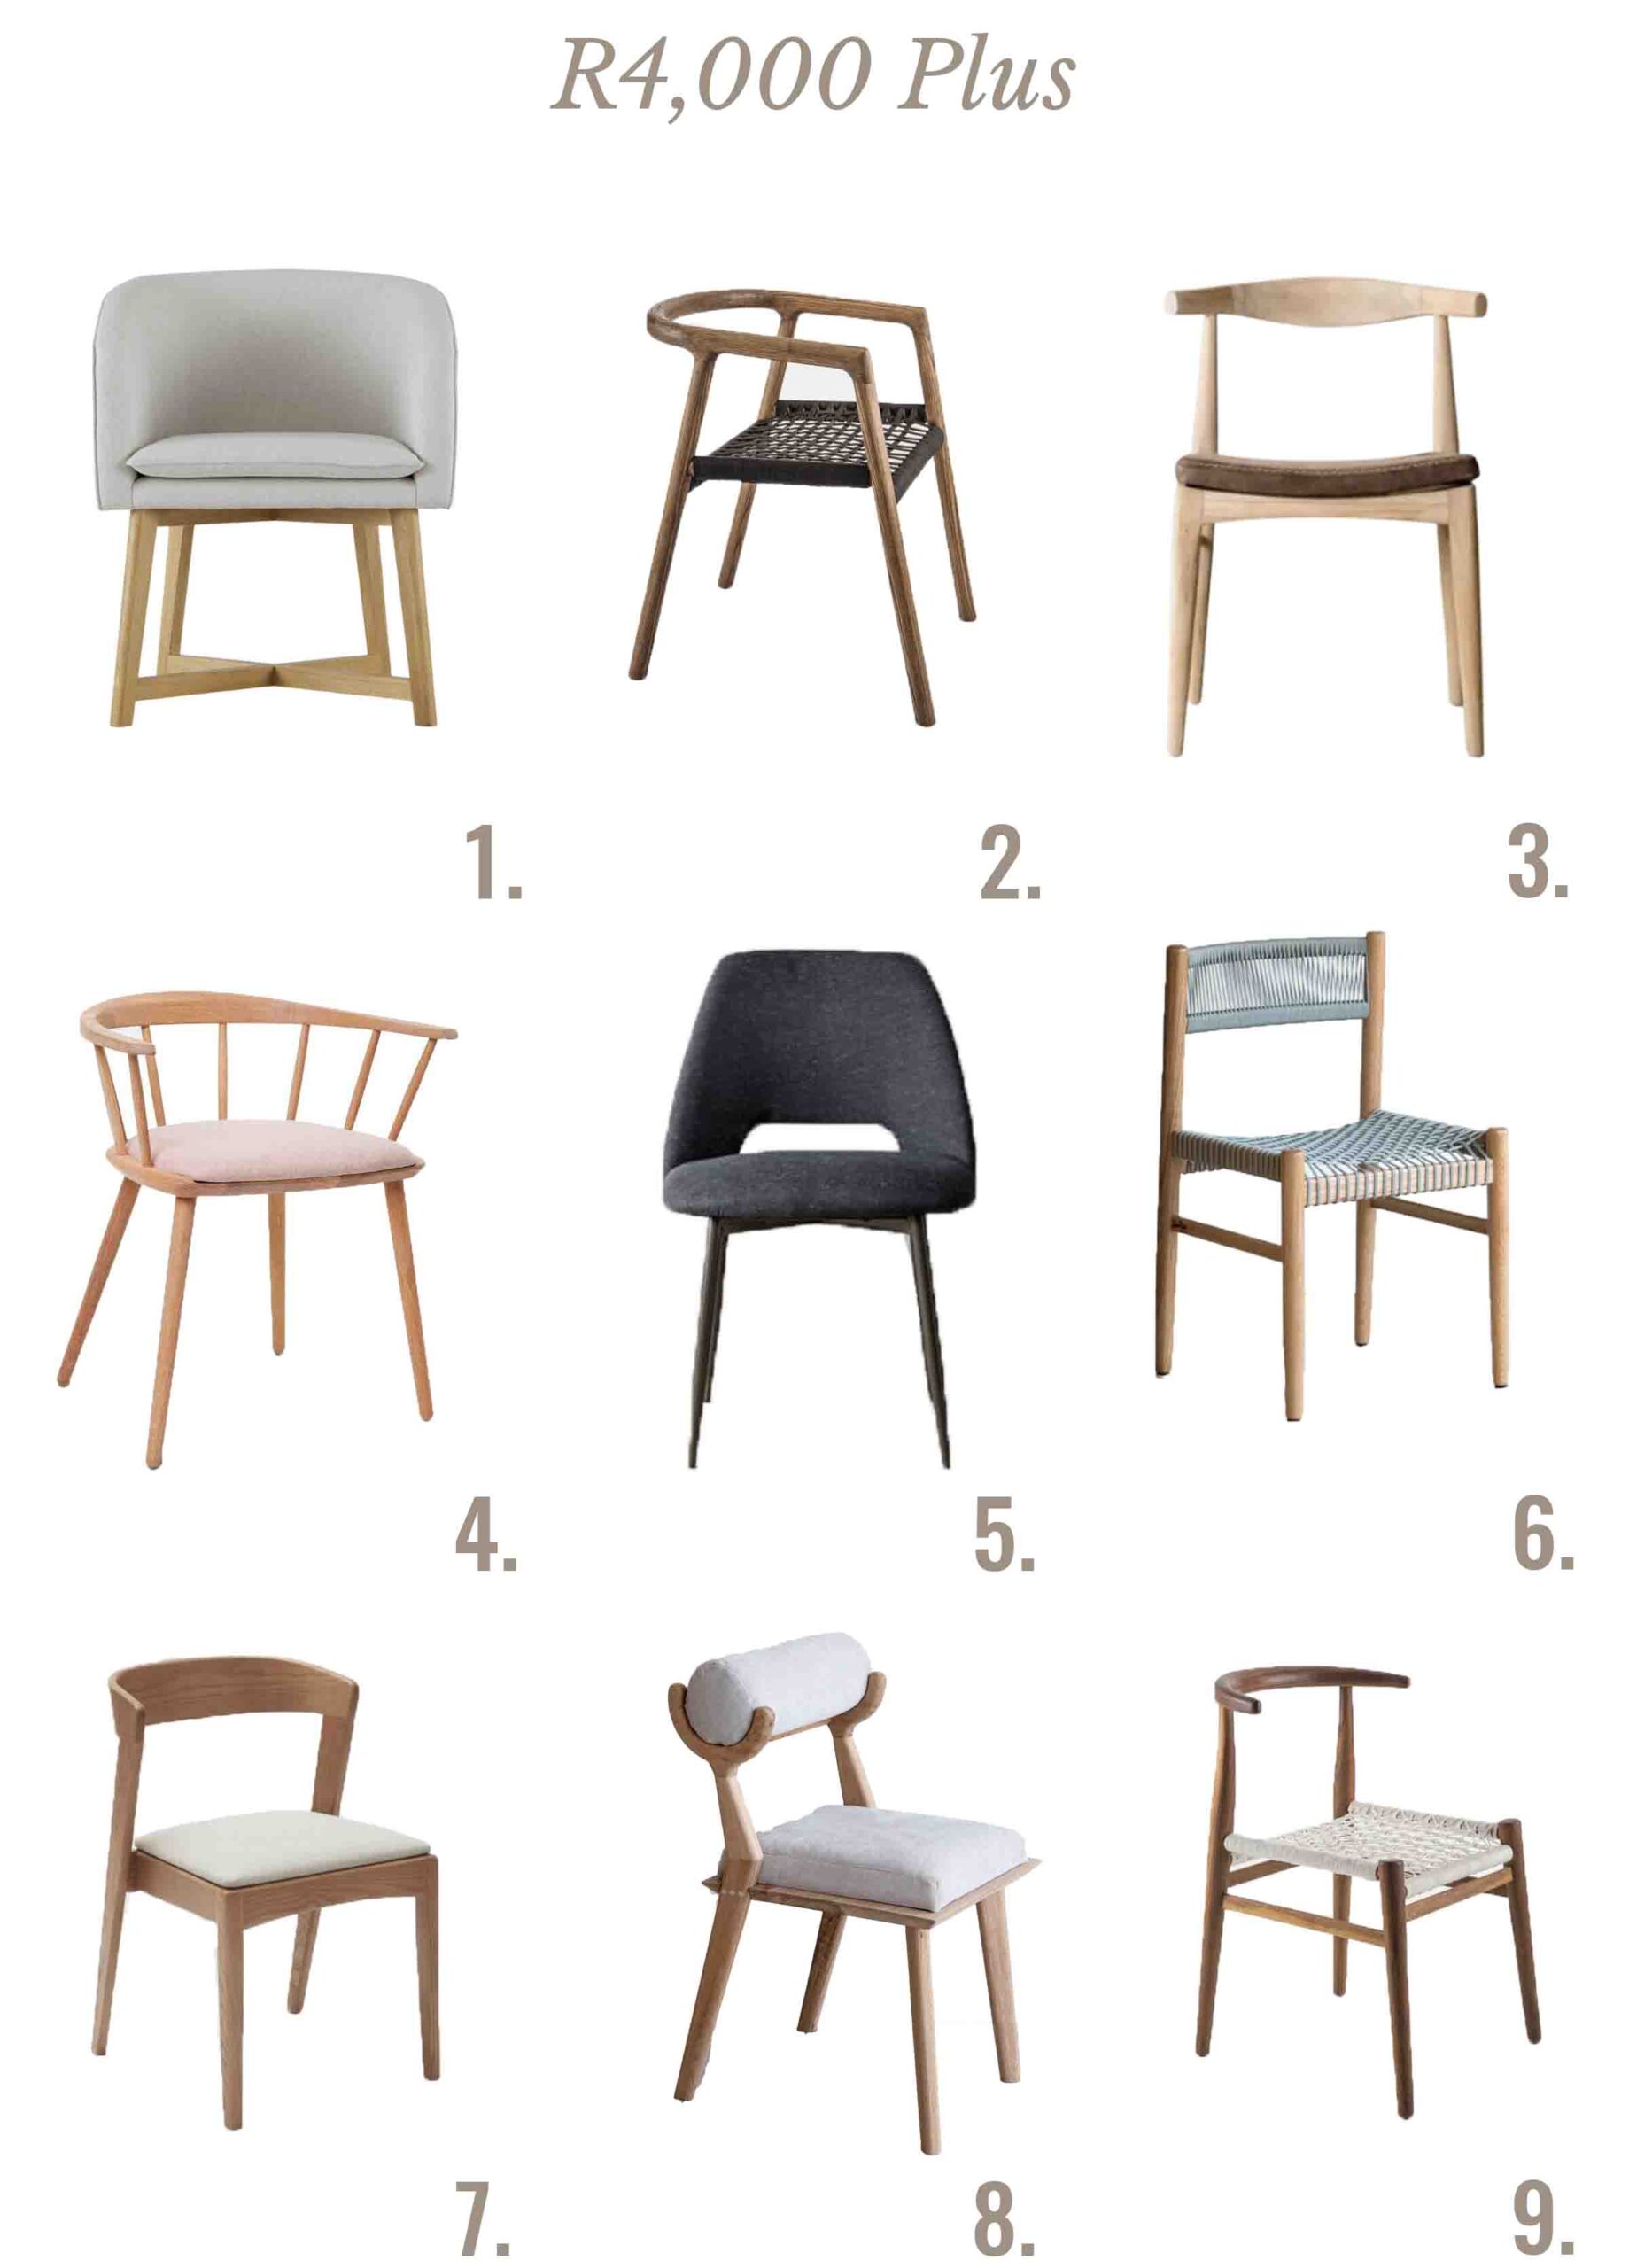 Dining Chairs Over R4000 (1)